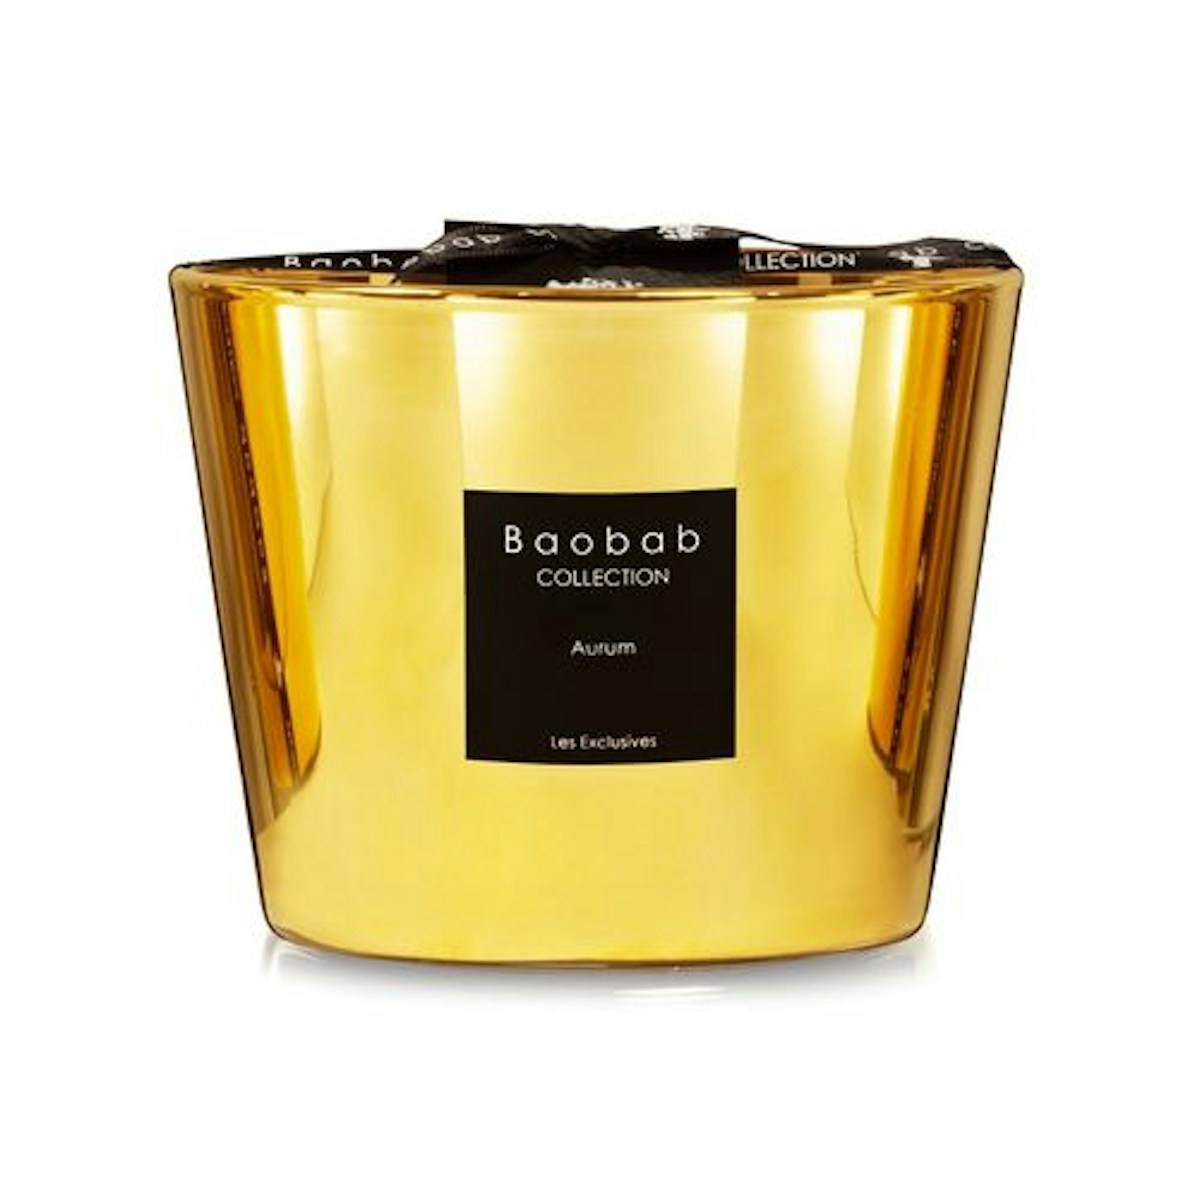 Aurum Scented Candle - 12 Best Scented Candles & Fragrances For Your Home - Style Guide - LuxDeco.com